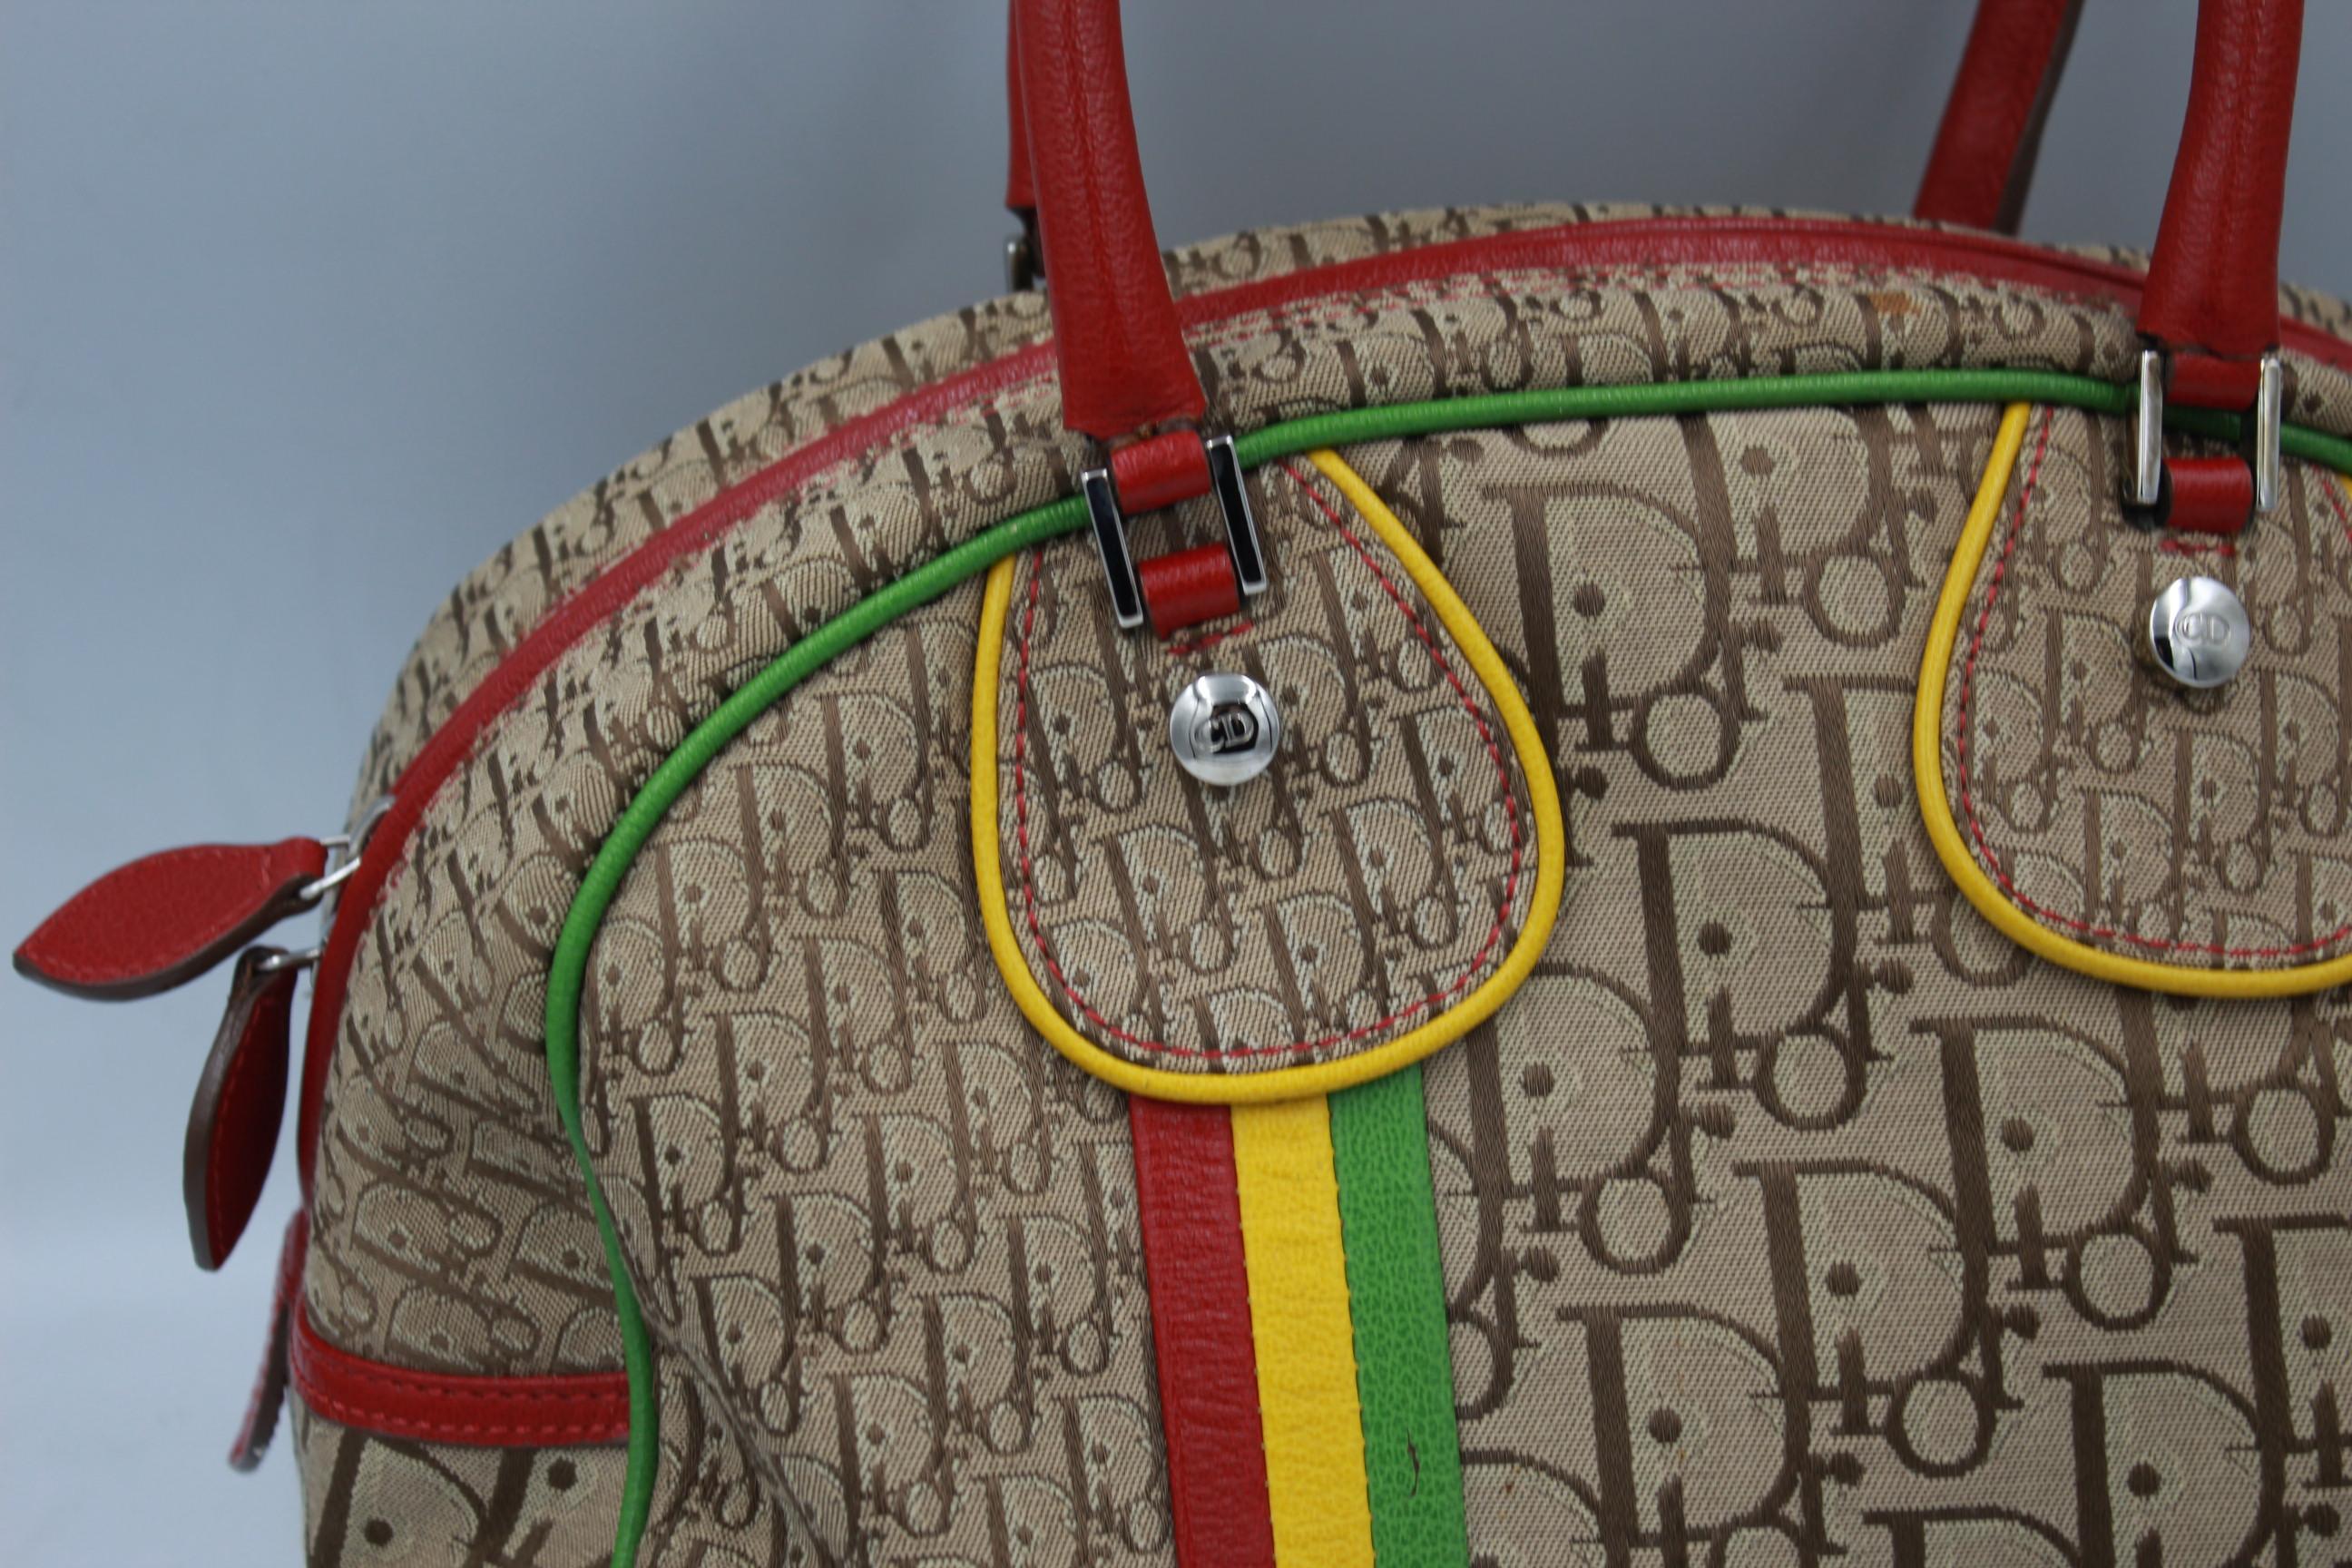 Christian Dior Rasta Bowling bag in canvas and multicolor leather.
Really good condition
Size 26x21